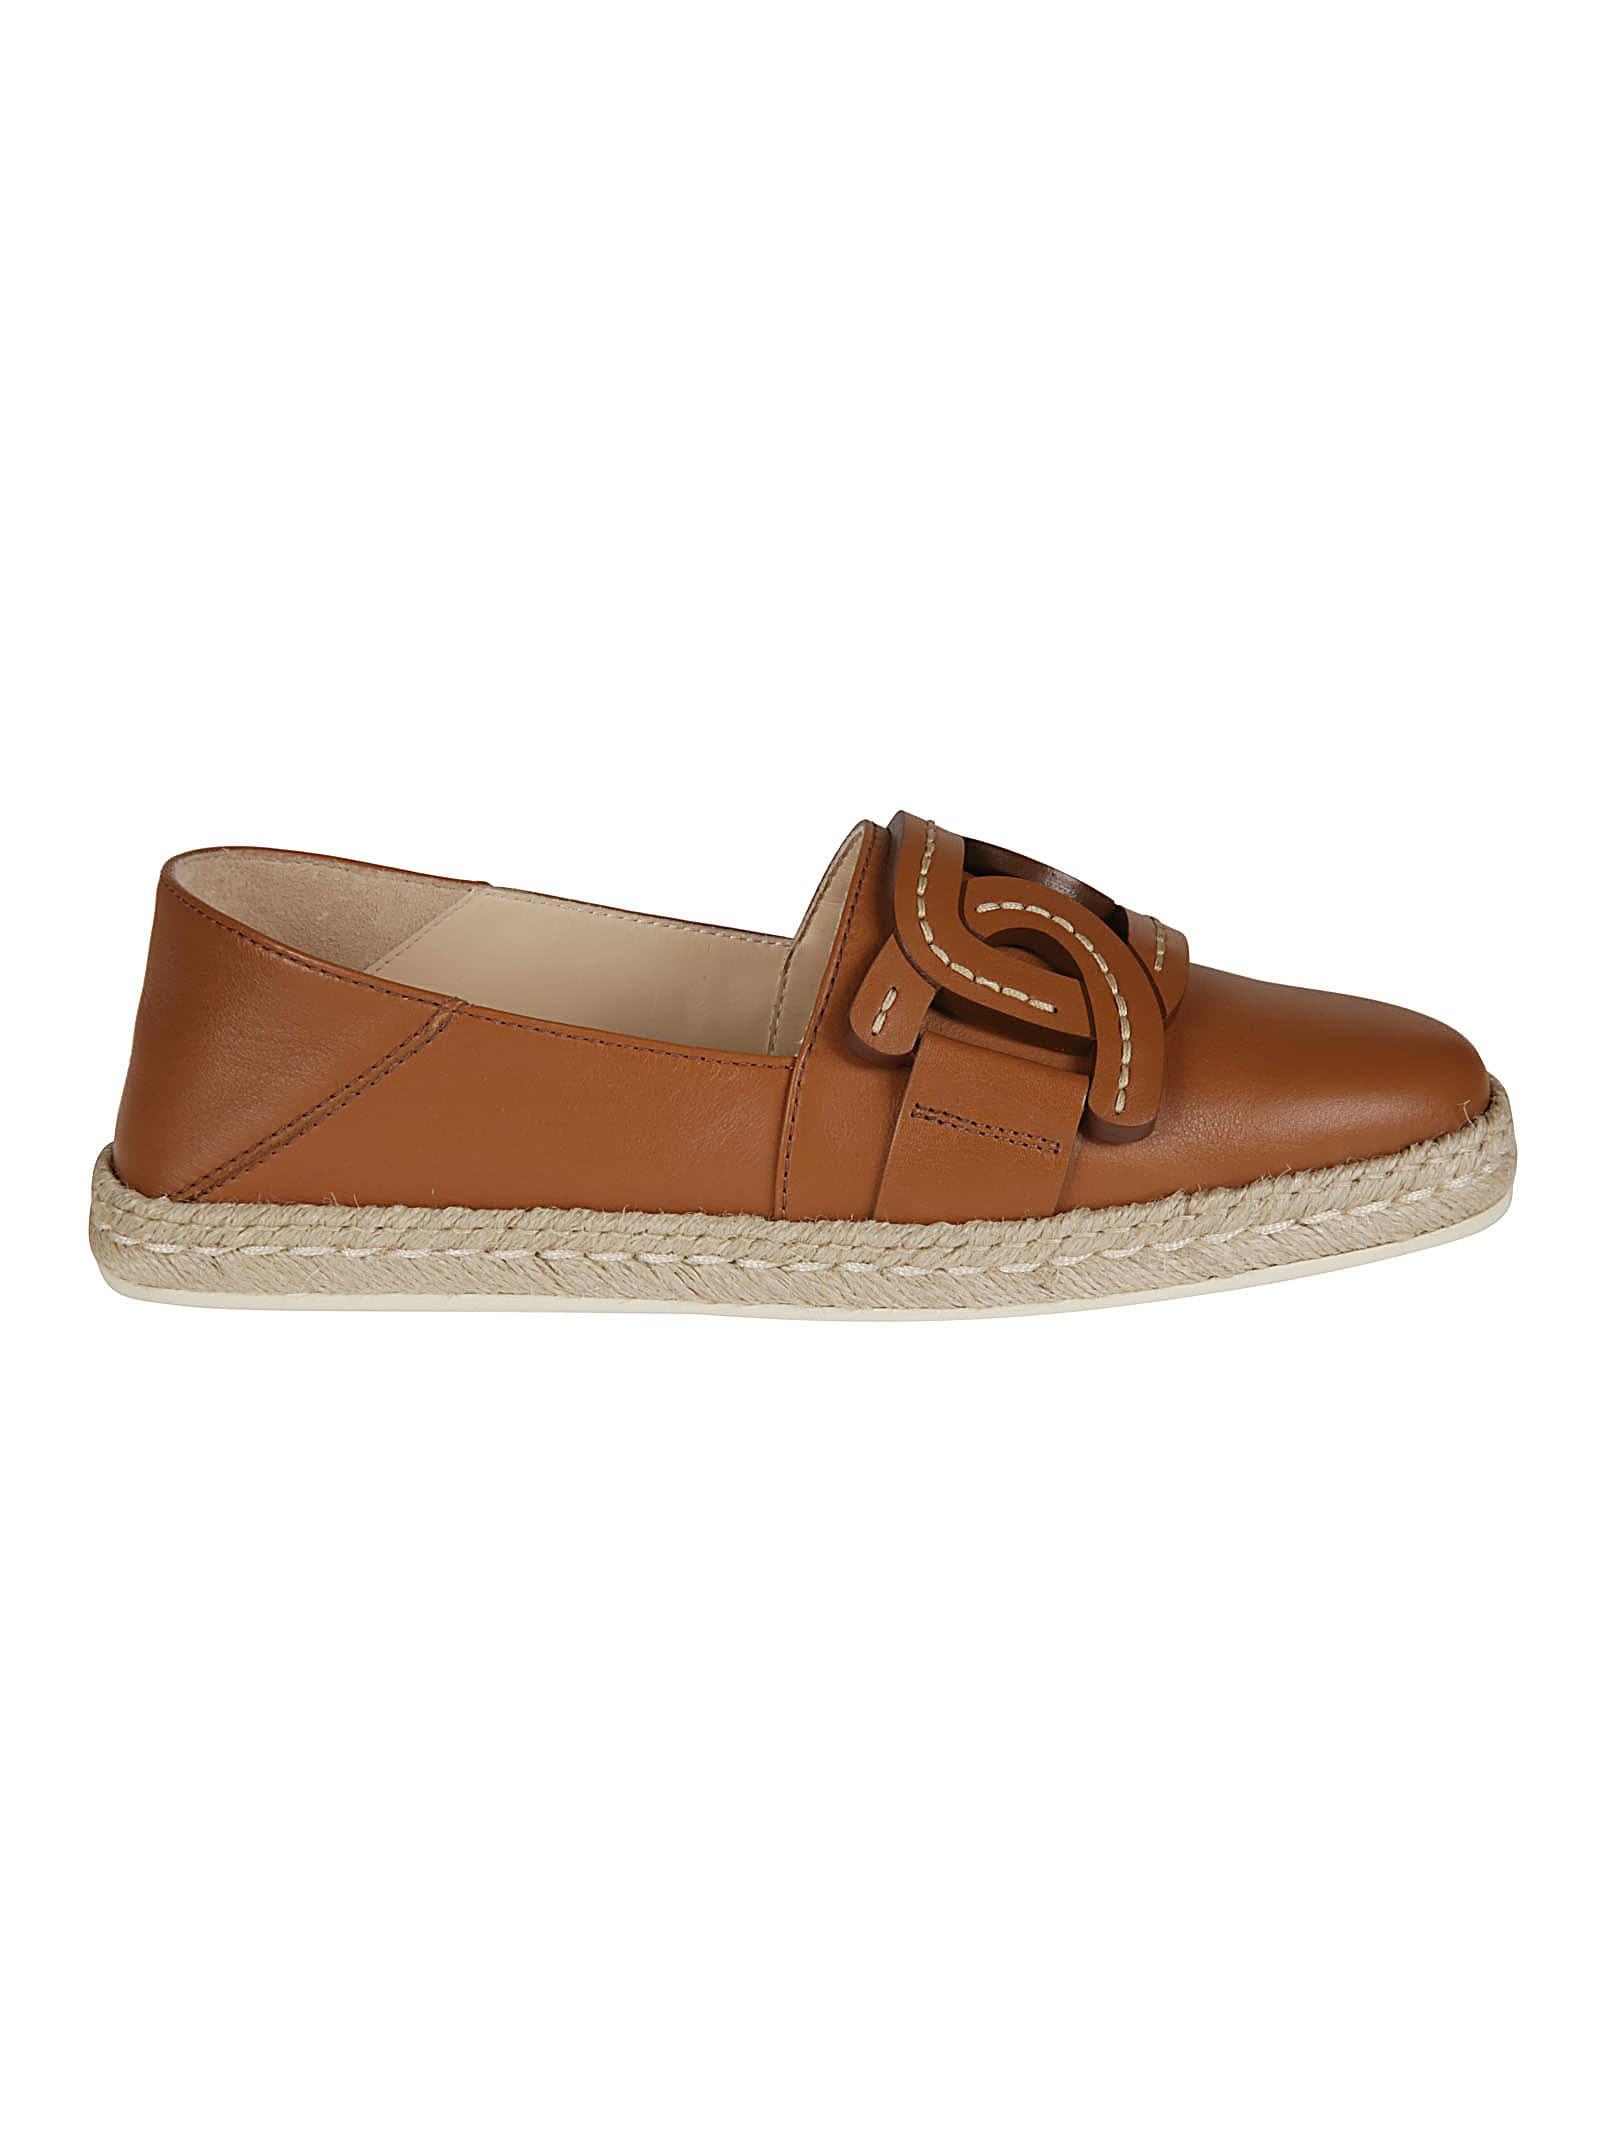 Buy Tods Gommino Raffia Loafers online, shop Tods shoes with free shipping